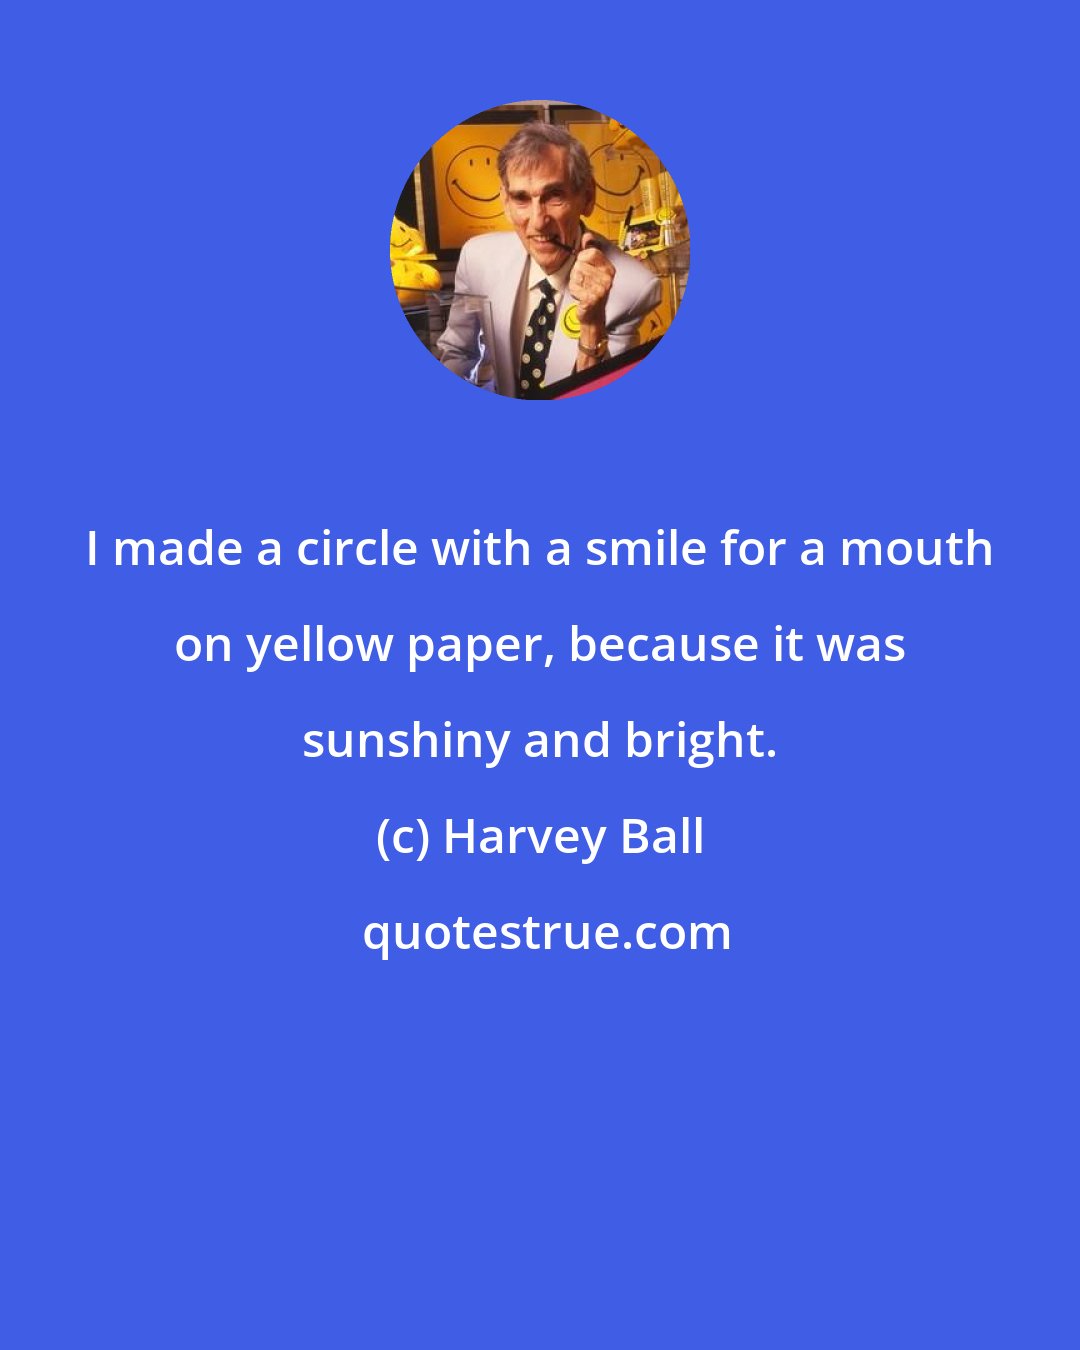 Harvey Ball: I made a circle with a smile for a mouth on yellow paper, because it was sunshiny and bright.